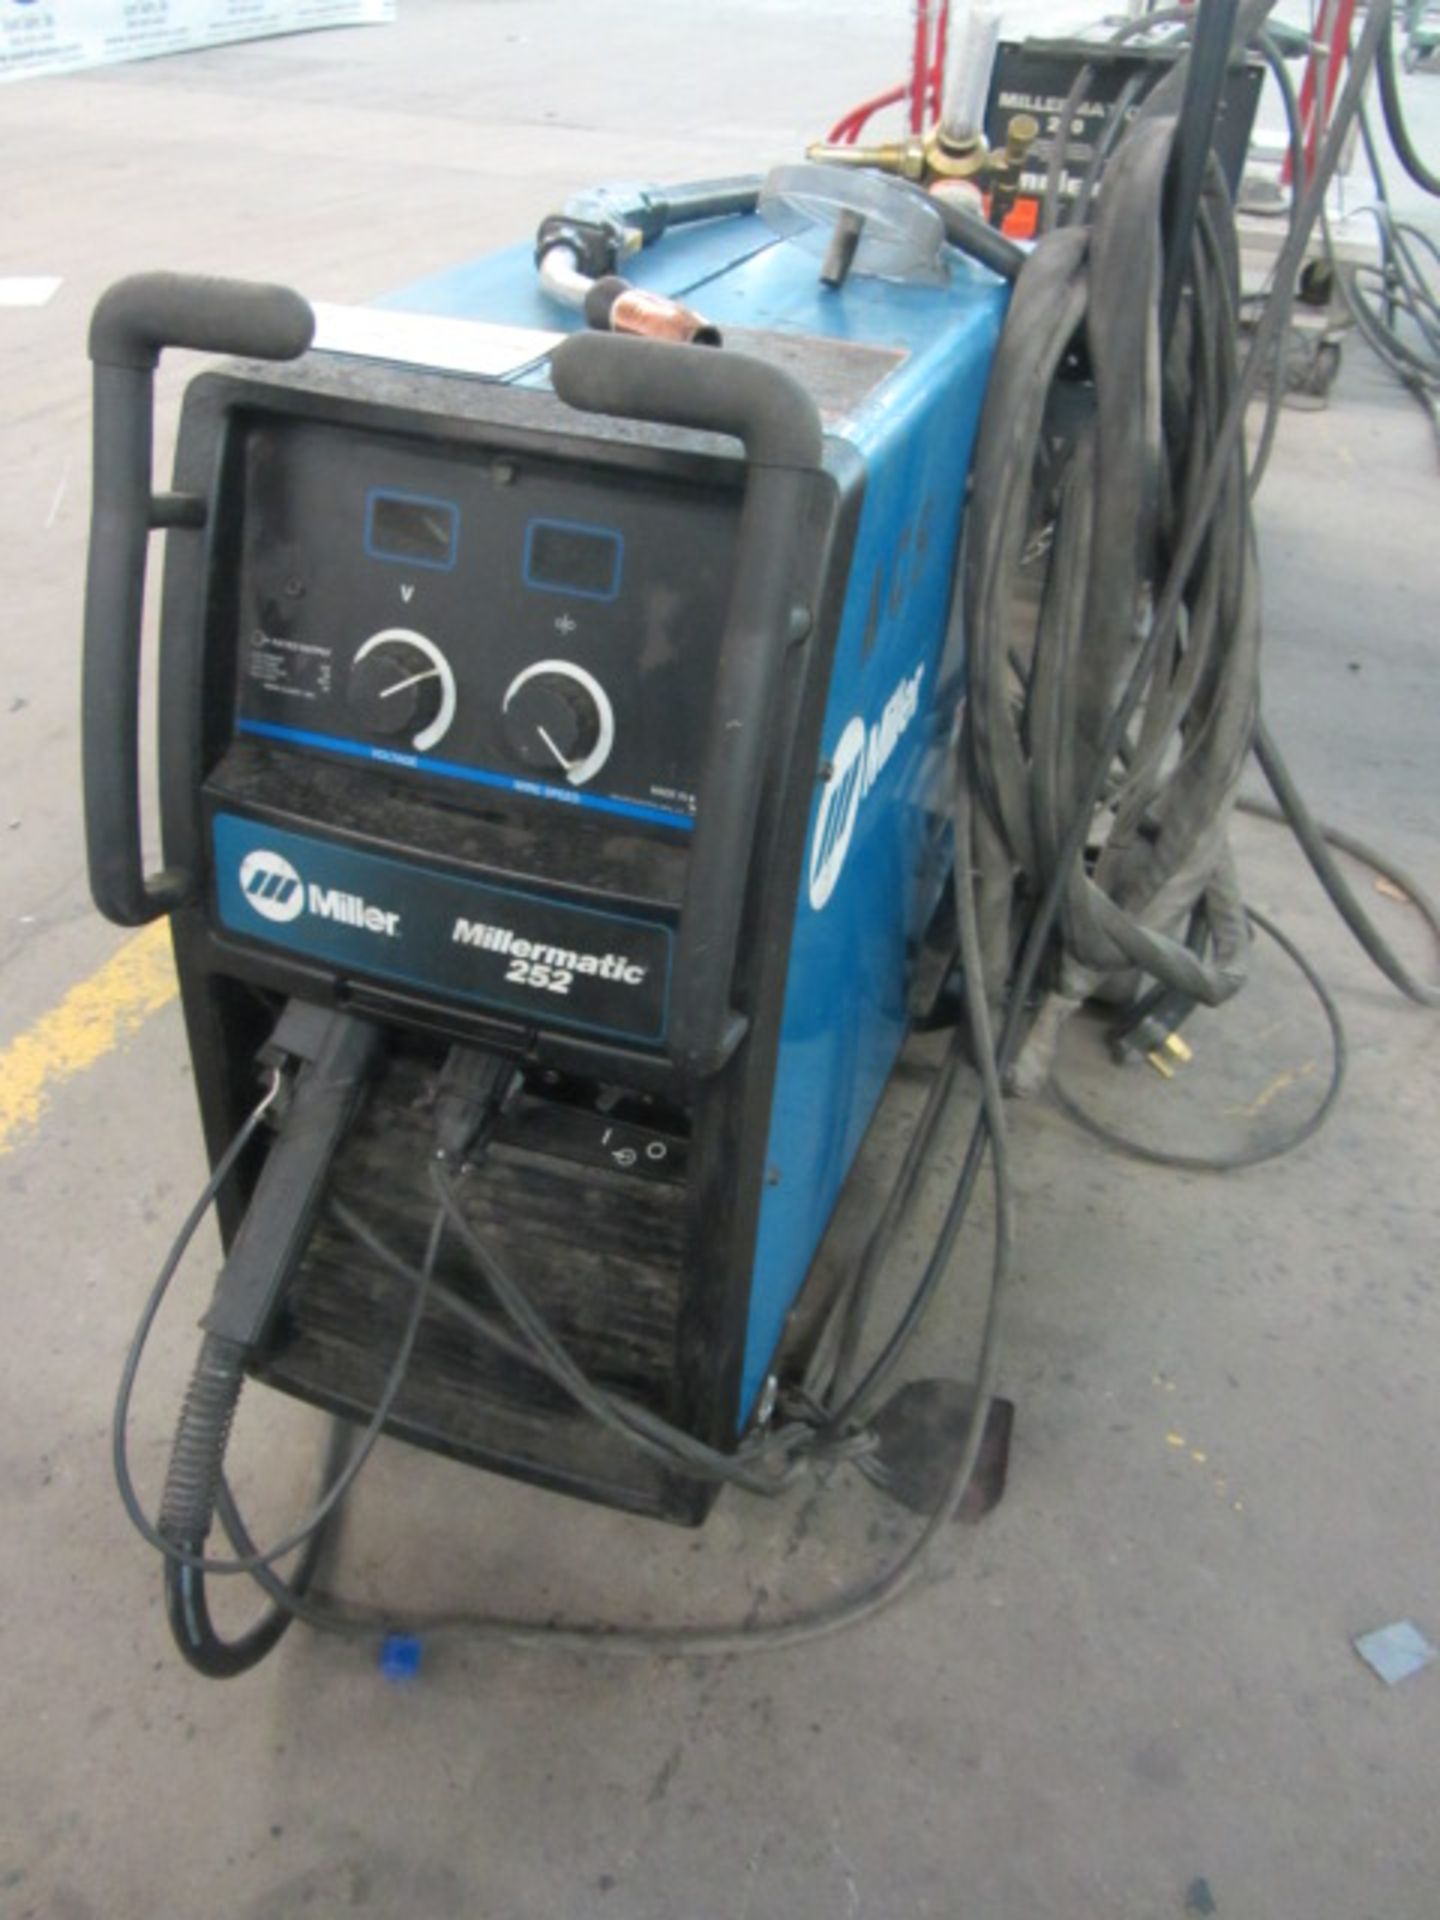 Millermatic 252 Portable Welder with Readouts, sn:MB390572N, Mfg. Approx 2012